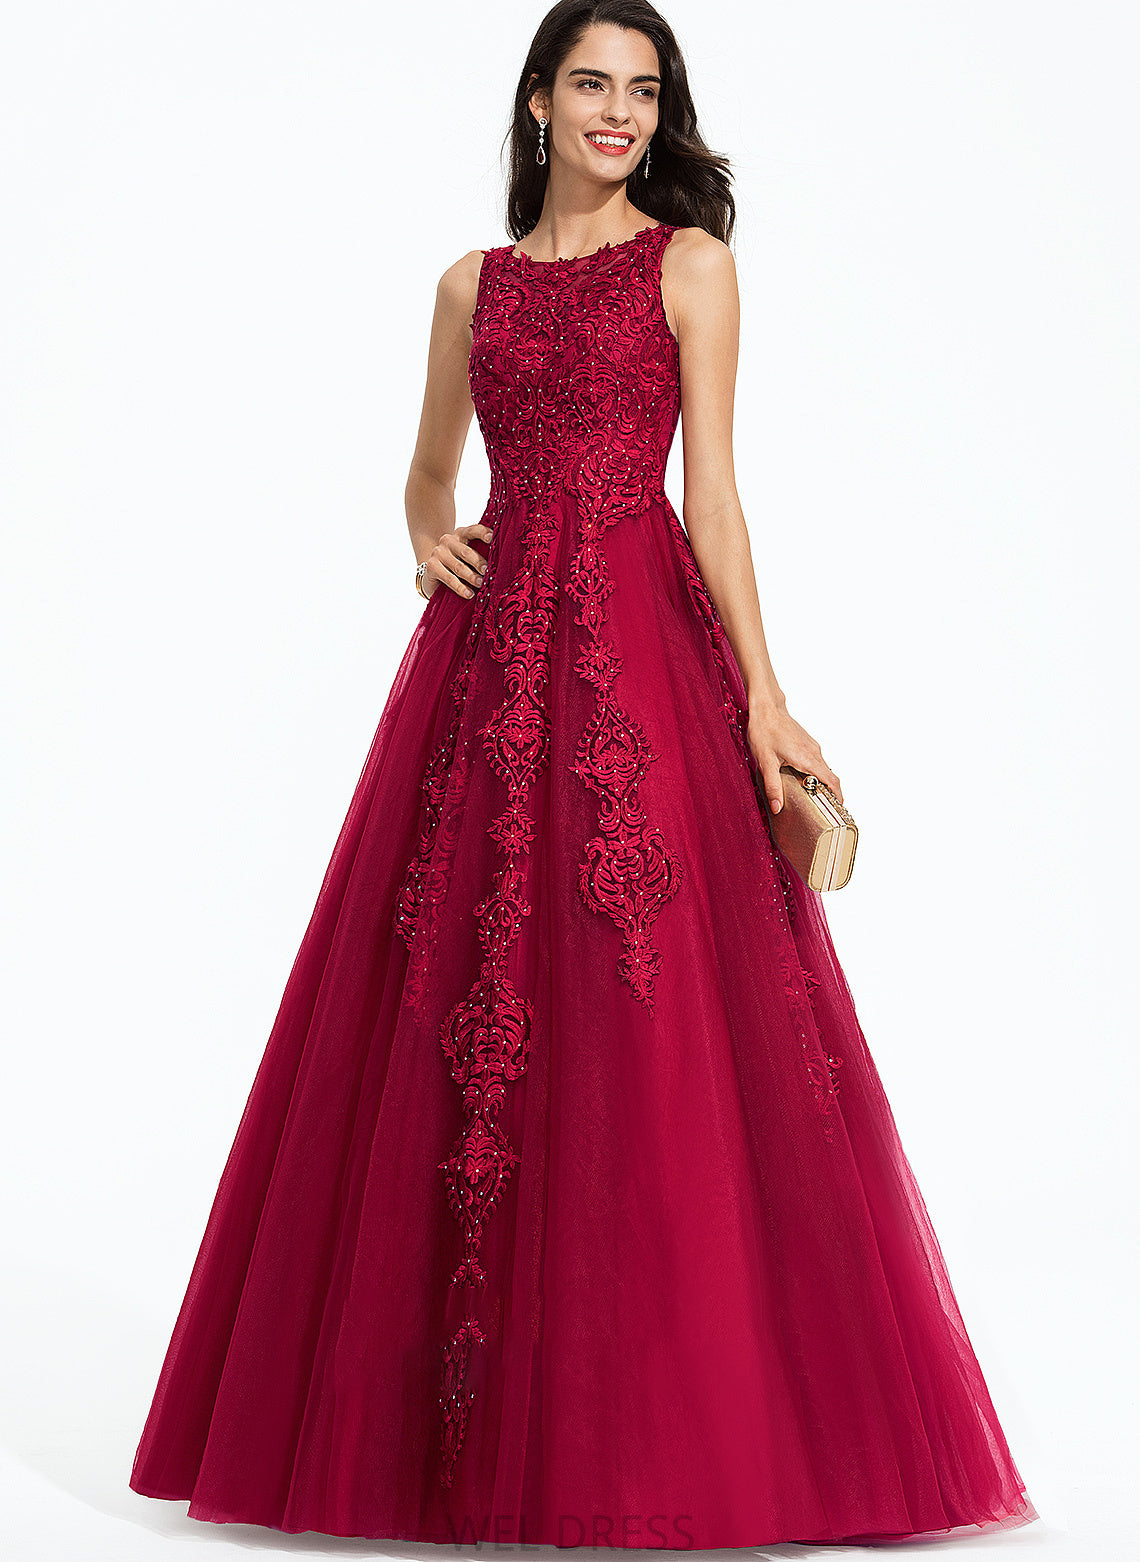 Alondra Scoop Neck Sweep Tulle Ball-Gown/Princess Beading With Train Prom Dresses